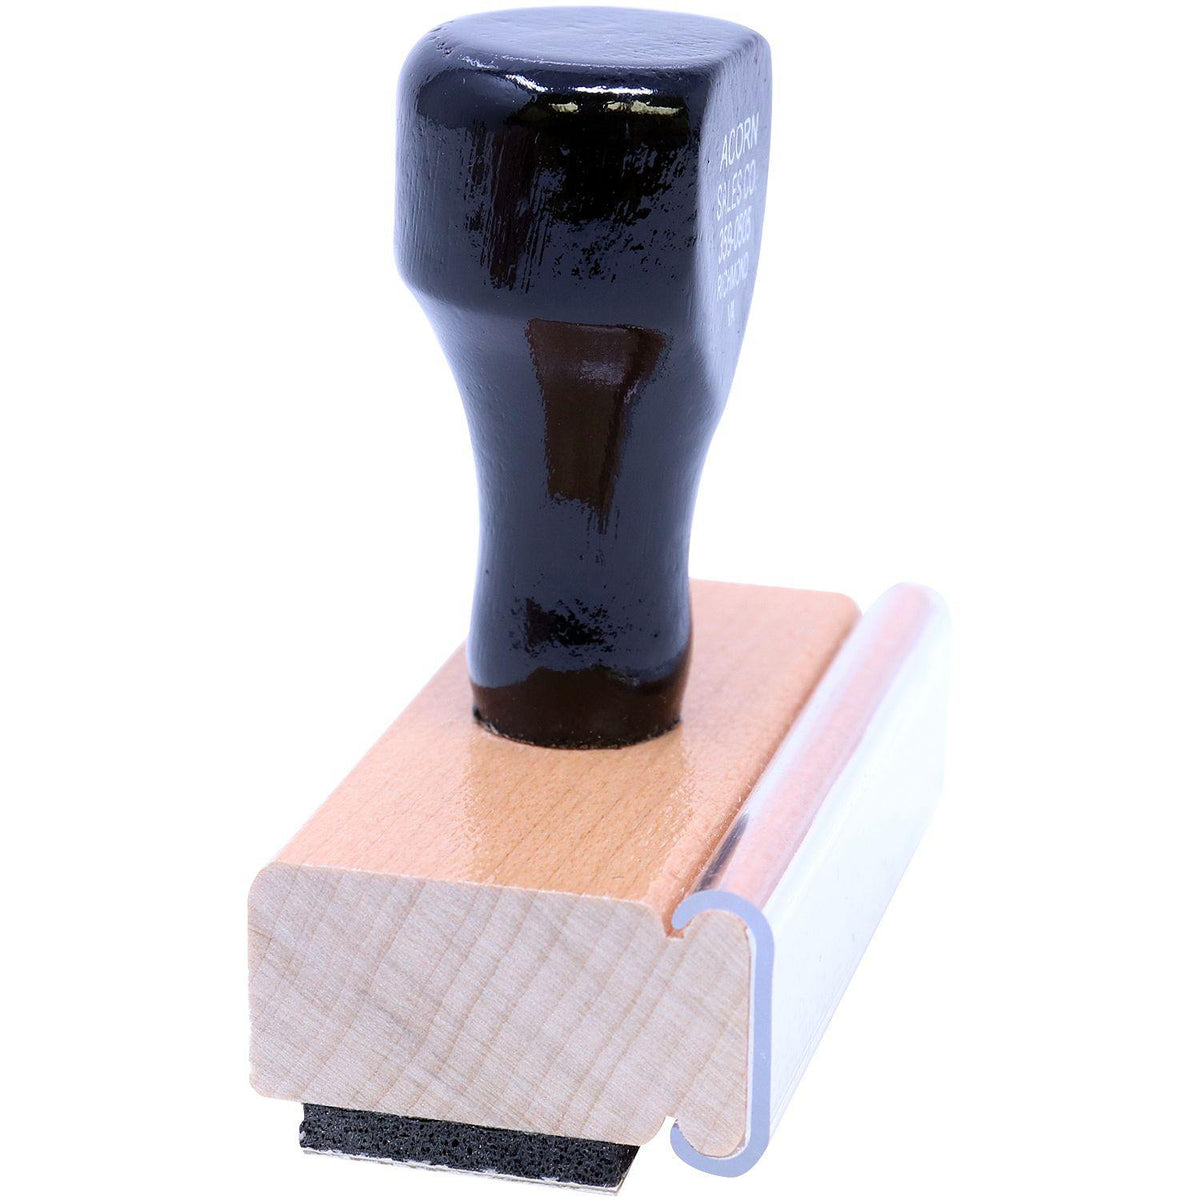 Side View of Large Pacemaker Rubber Stamp at an Angle